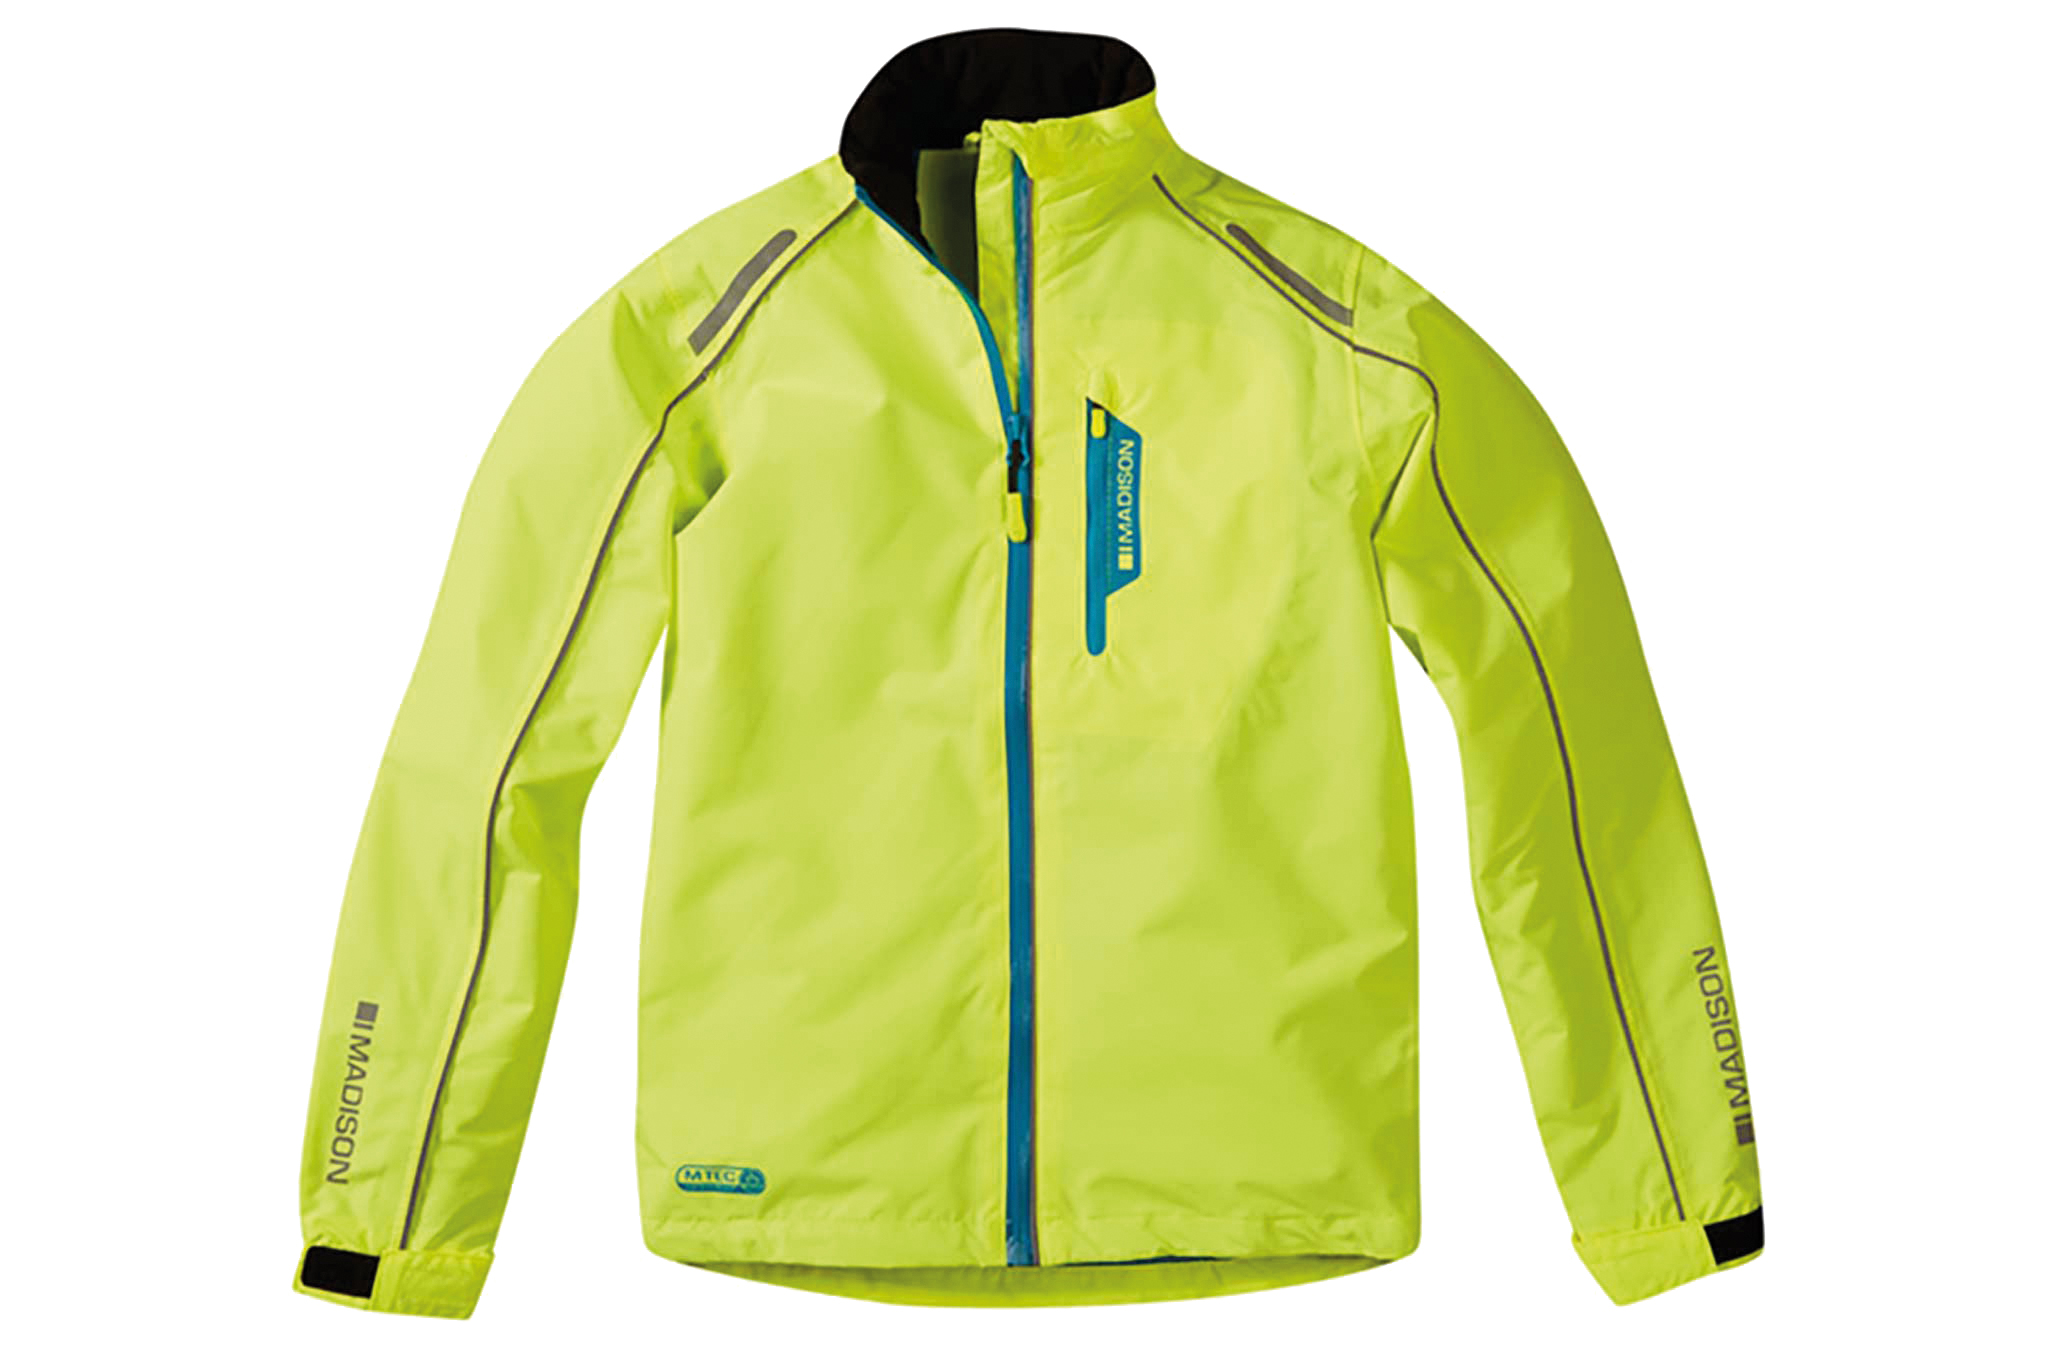 Group test: Choose the best waterproof jacket for a child